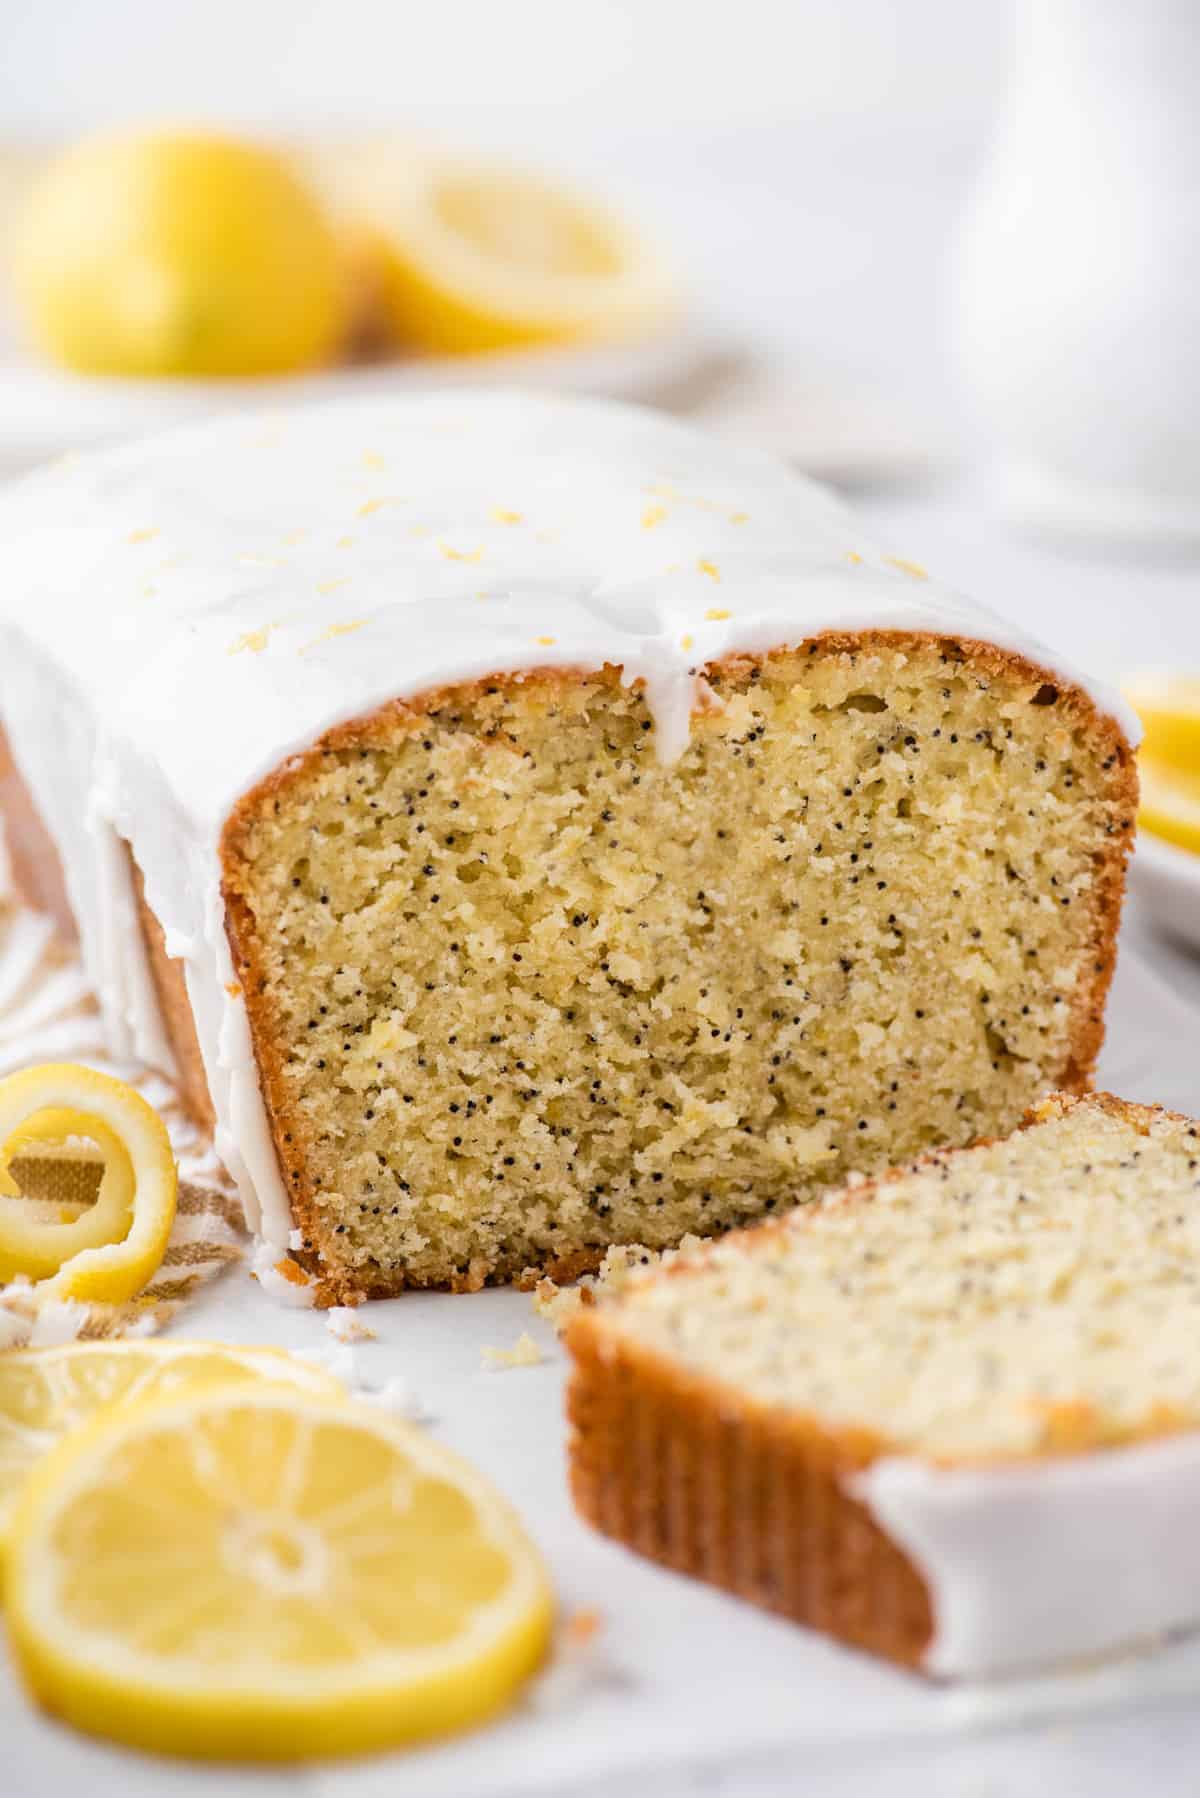 Loaf of lemon poppy seed bread with slice cut to show inside